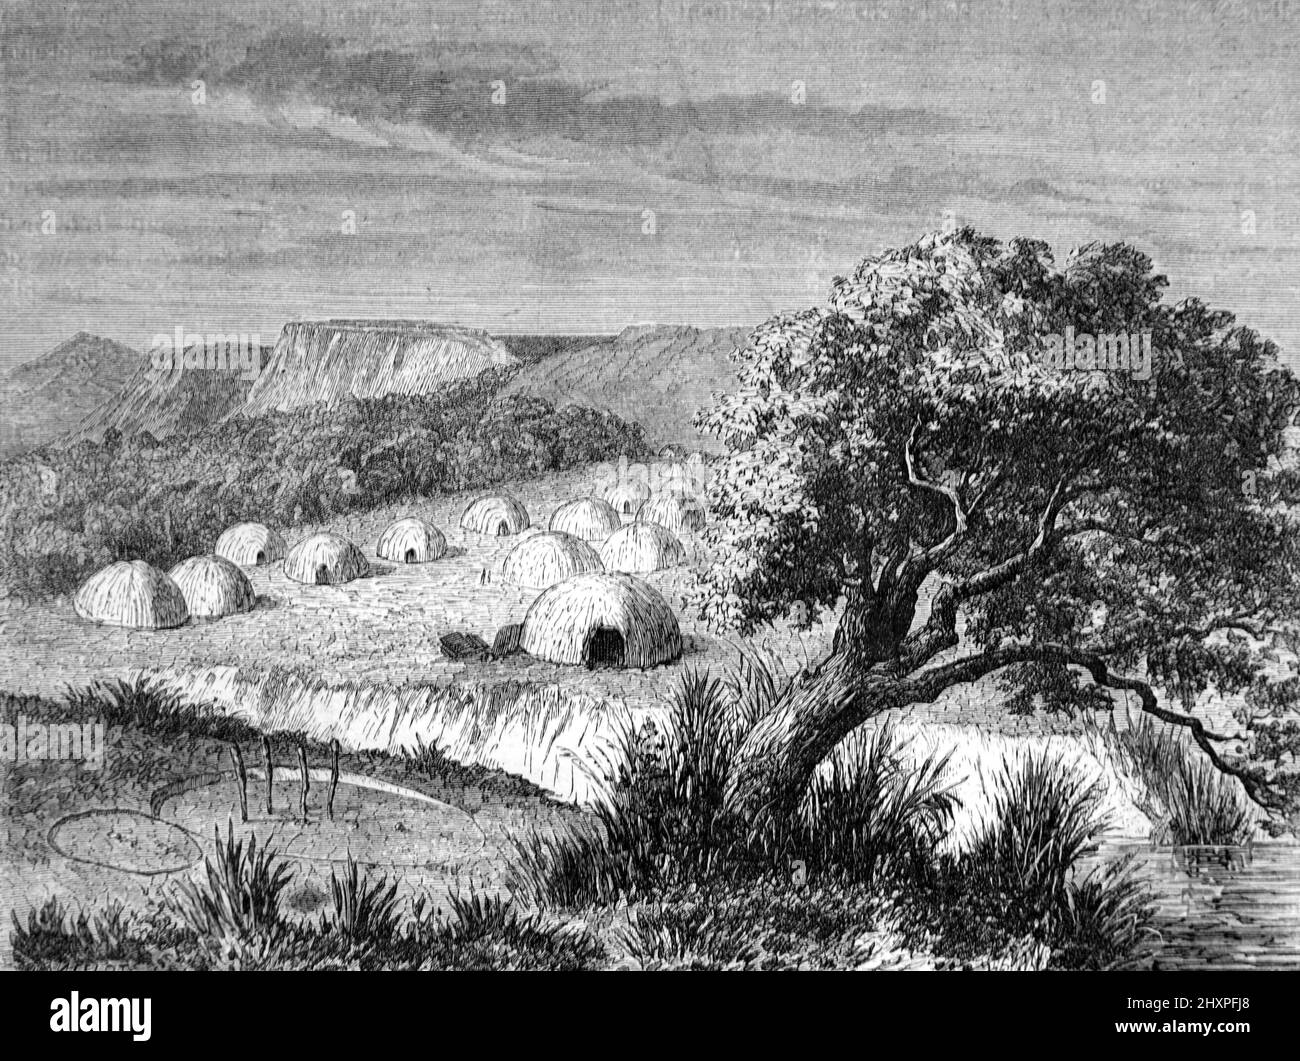 Kiowa Huts and Village of Native American or Indigenous Kiowa People of the Great Plains Region Oklahoma US, USA or United States of America. Vintage Illustration or Engraving 1860. Stock Photo